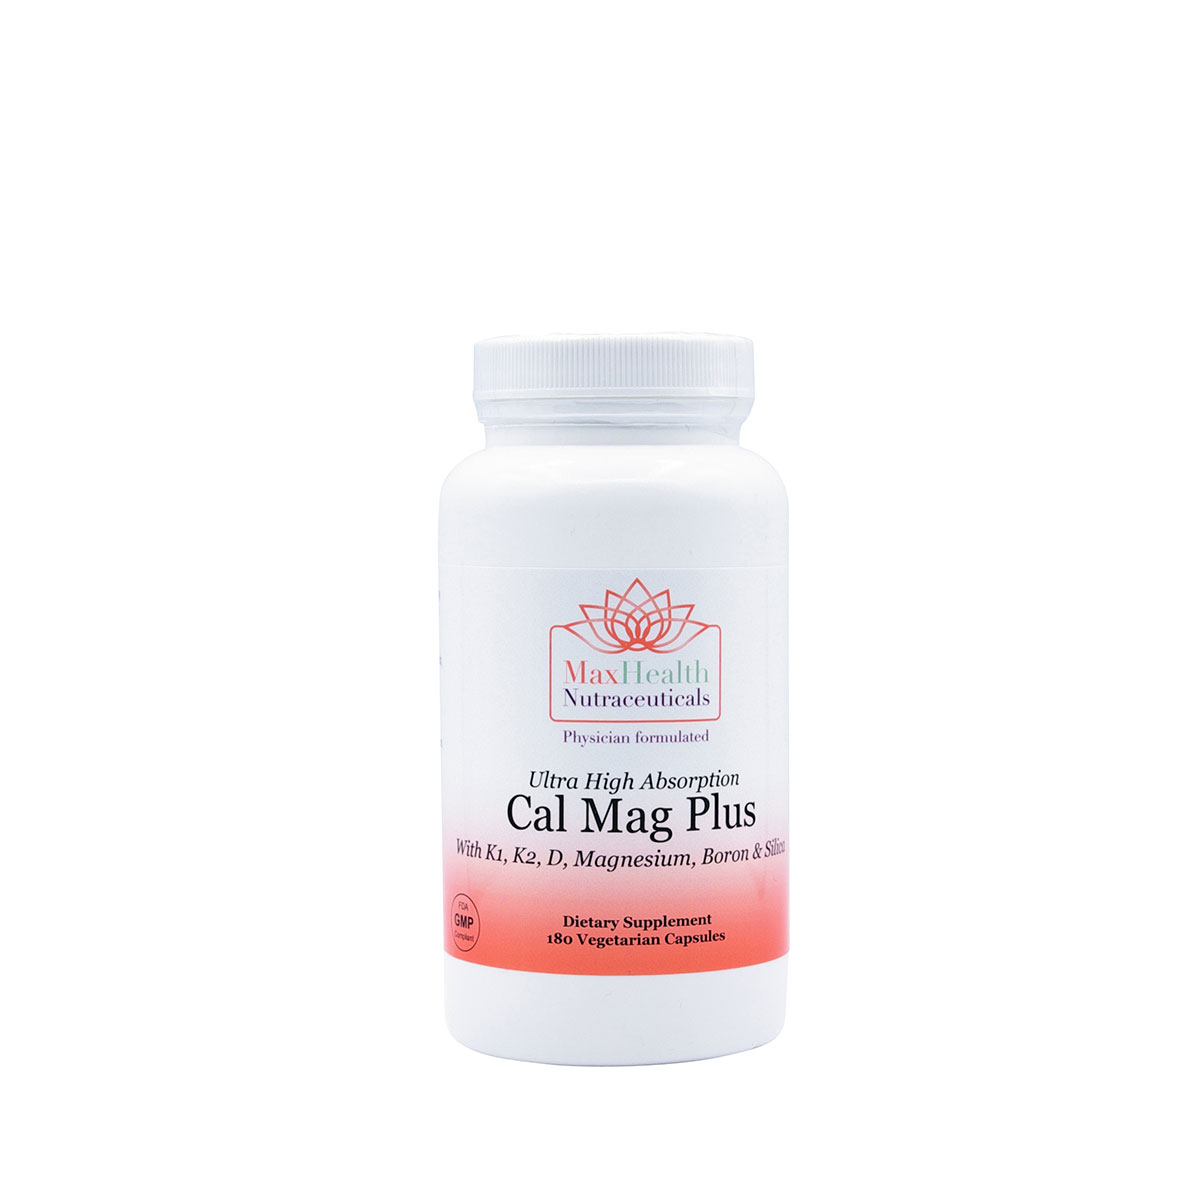 11Ultra High Absorption Cal Mag Plus with K1, K2, D, Magnesium, Boron & Silica